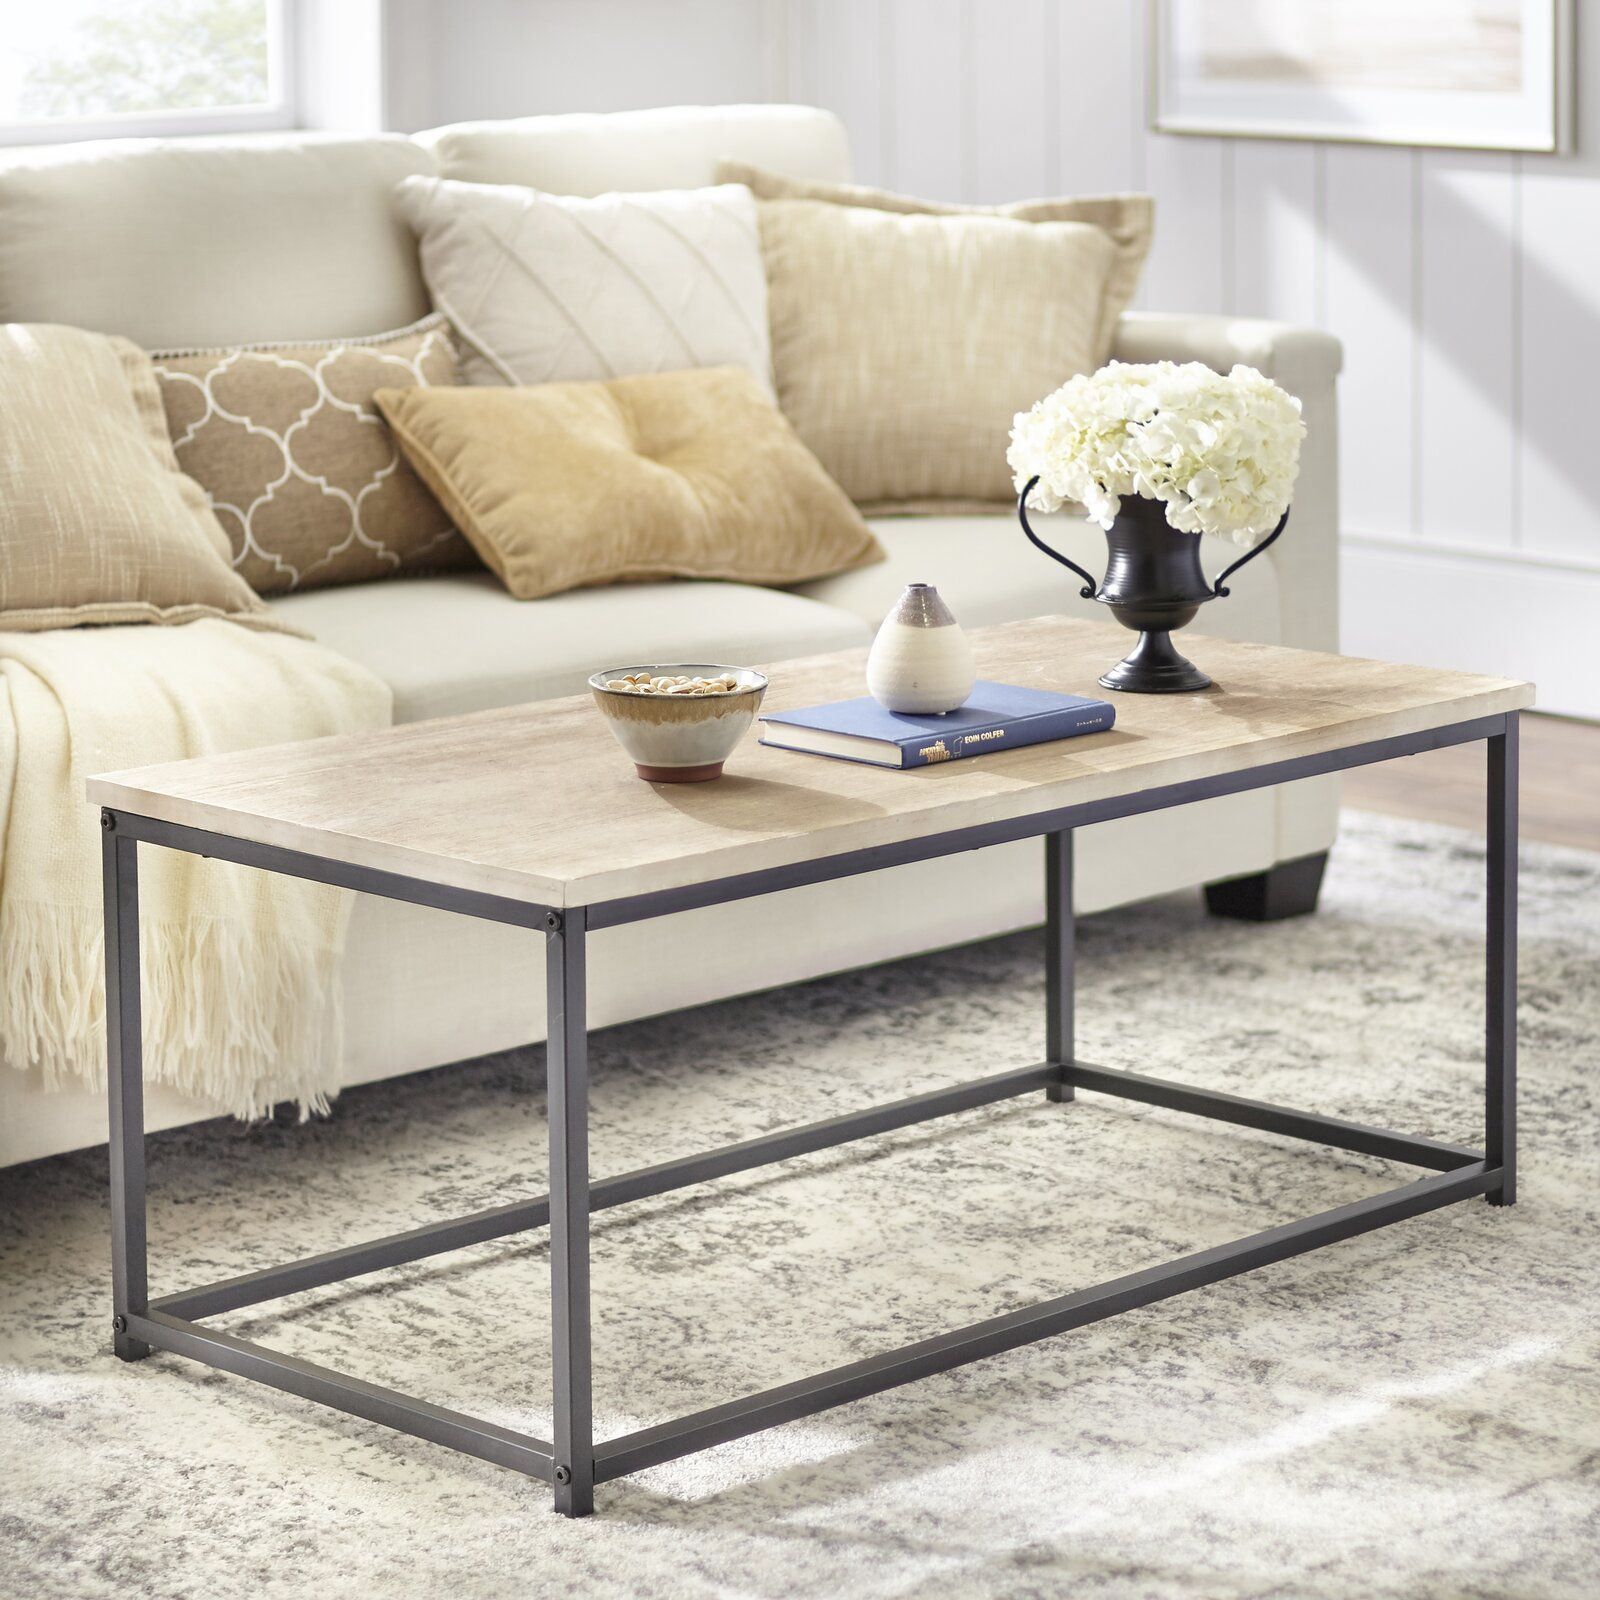 Brookhn Frame Coffee Table With Tray Top, Weathered White Finished Top,  Crafted Of Melamine Finished Mdf And Metal – Walmart Pertaining To Melamine Coffee Tables (View 13 of 15)